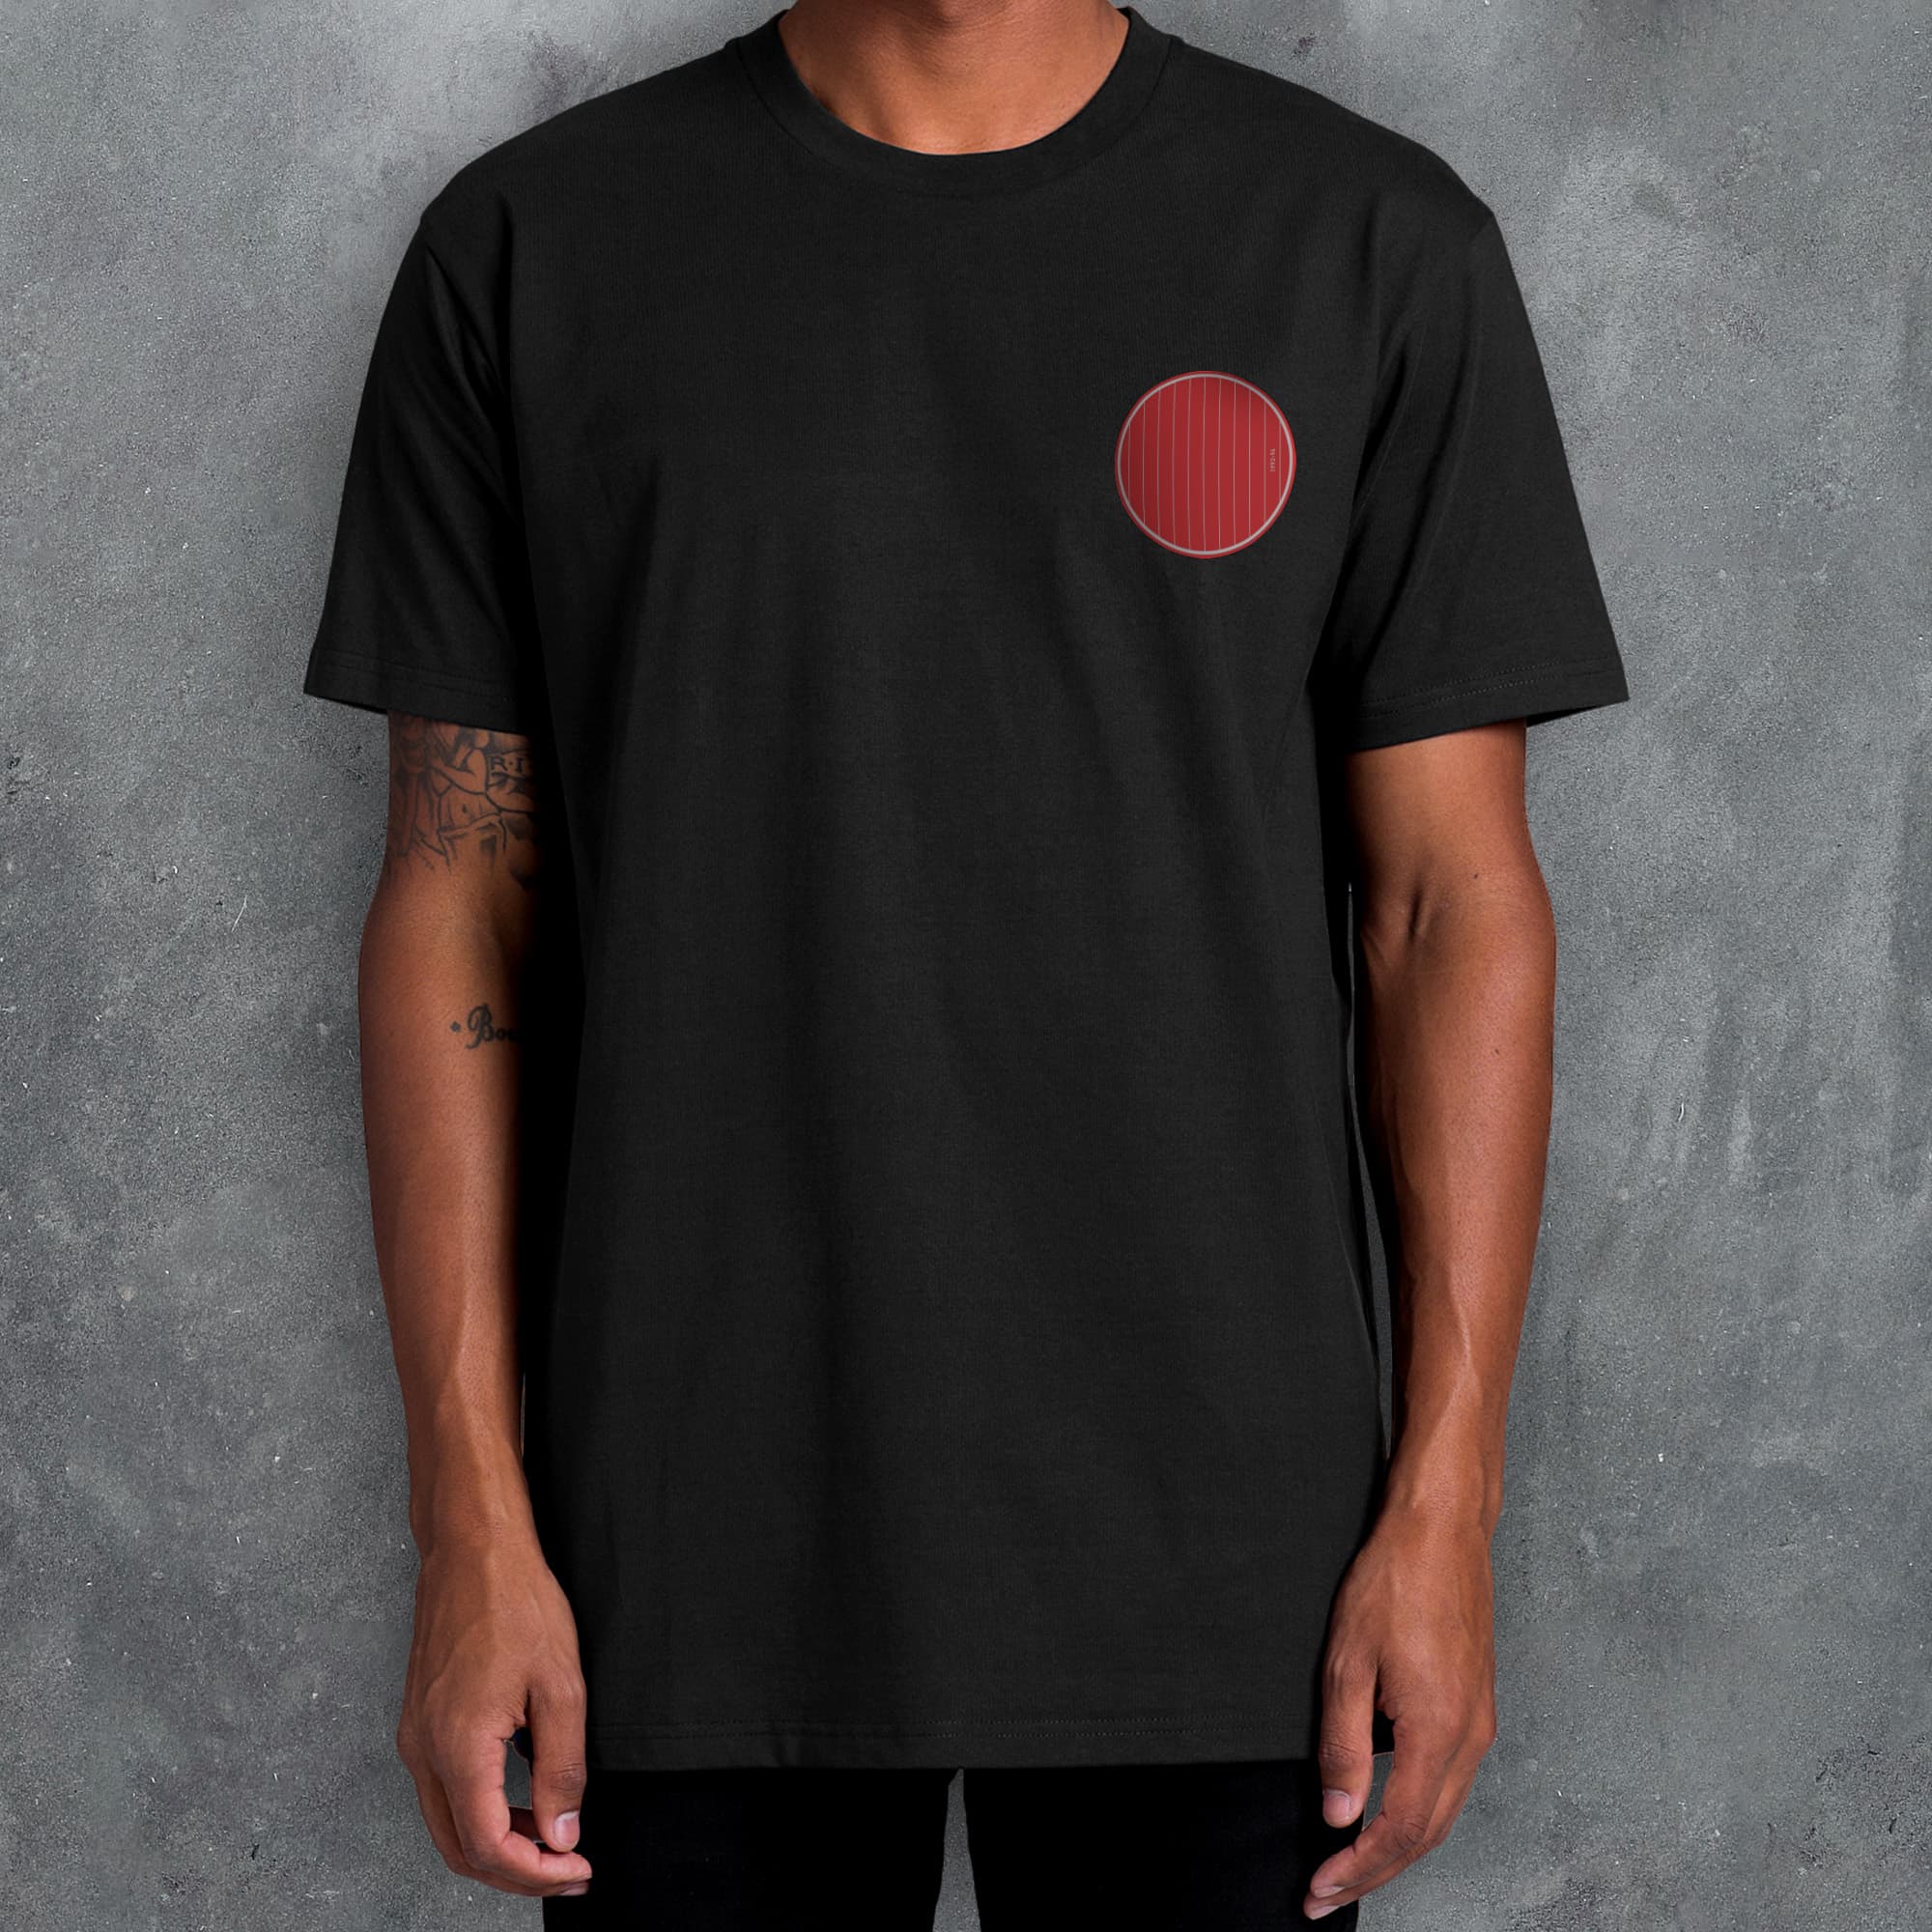 a man wearing a black shirt with a red circle on it